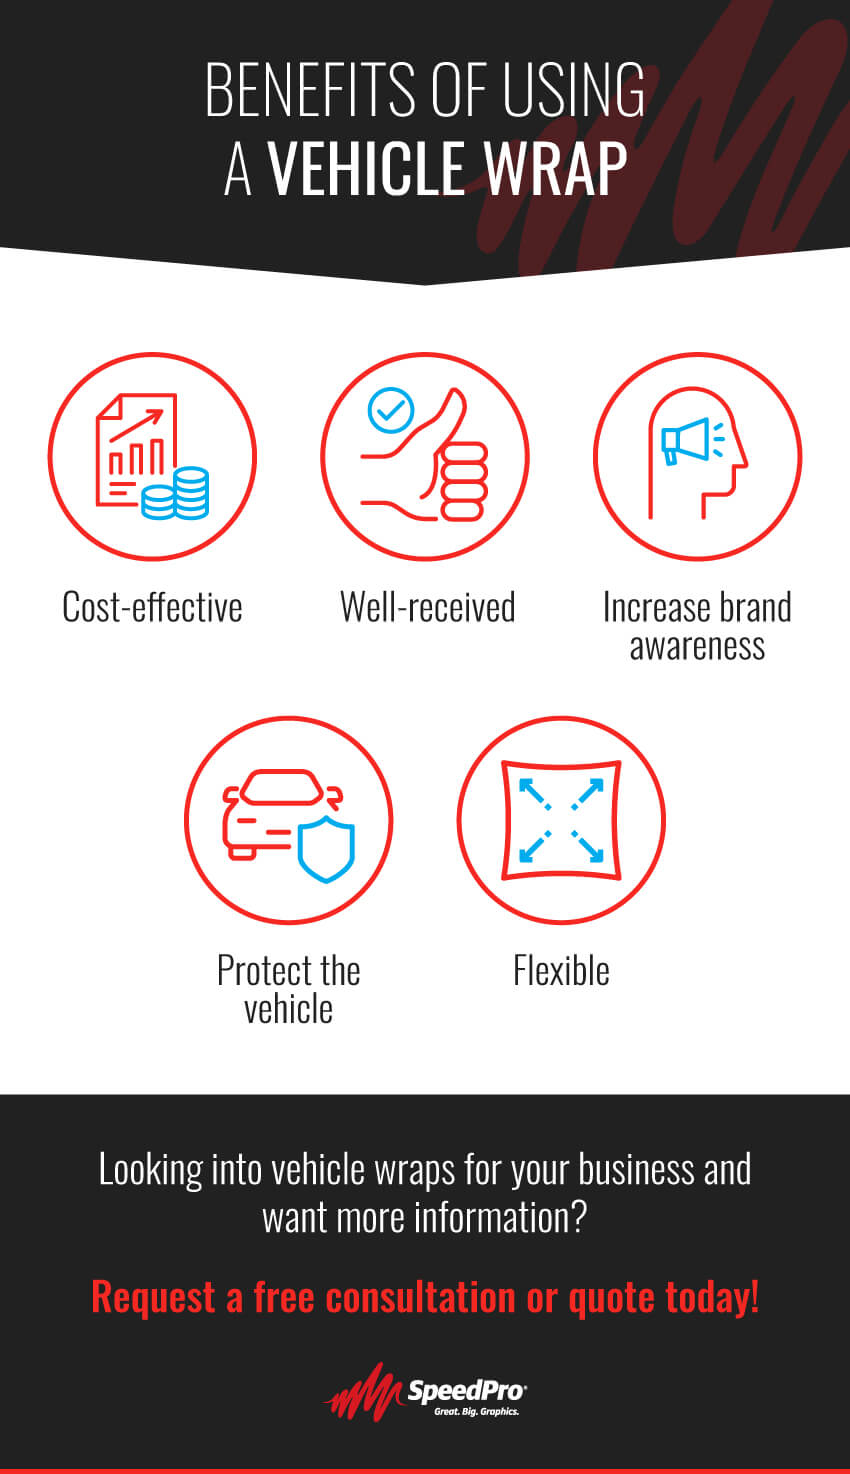 Benefits of Using a Vehicle Wrap [Infographic]